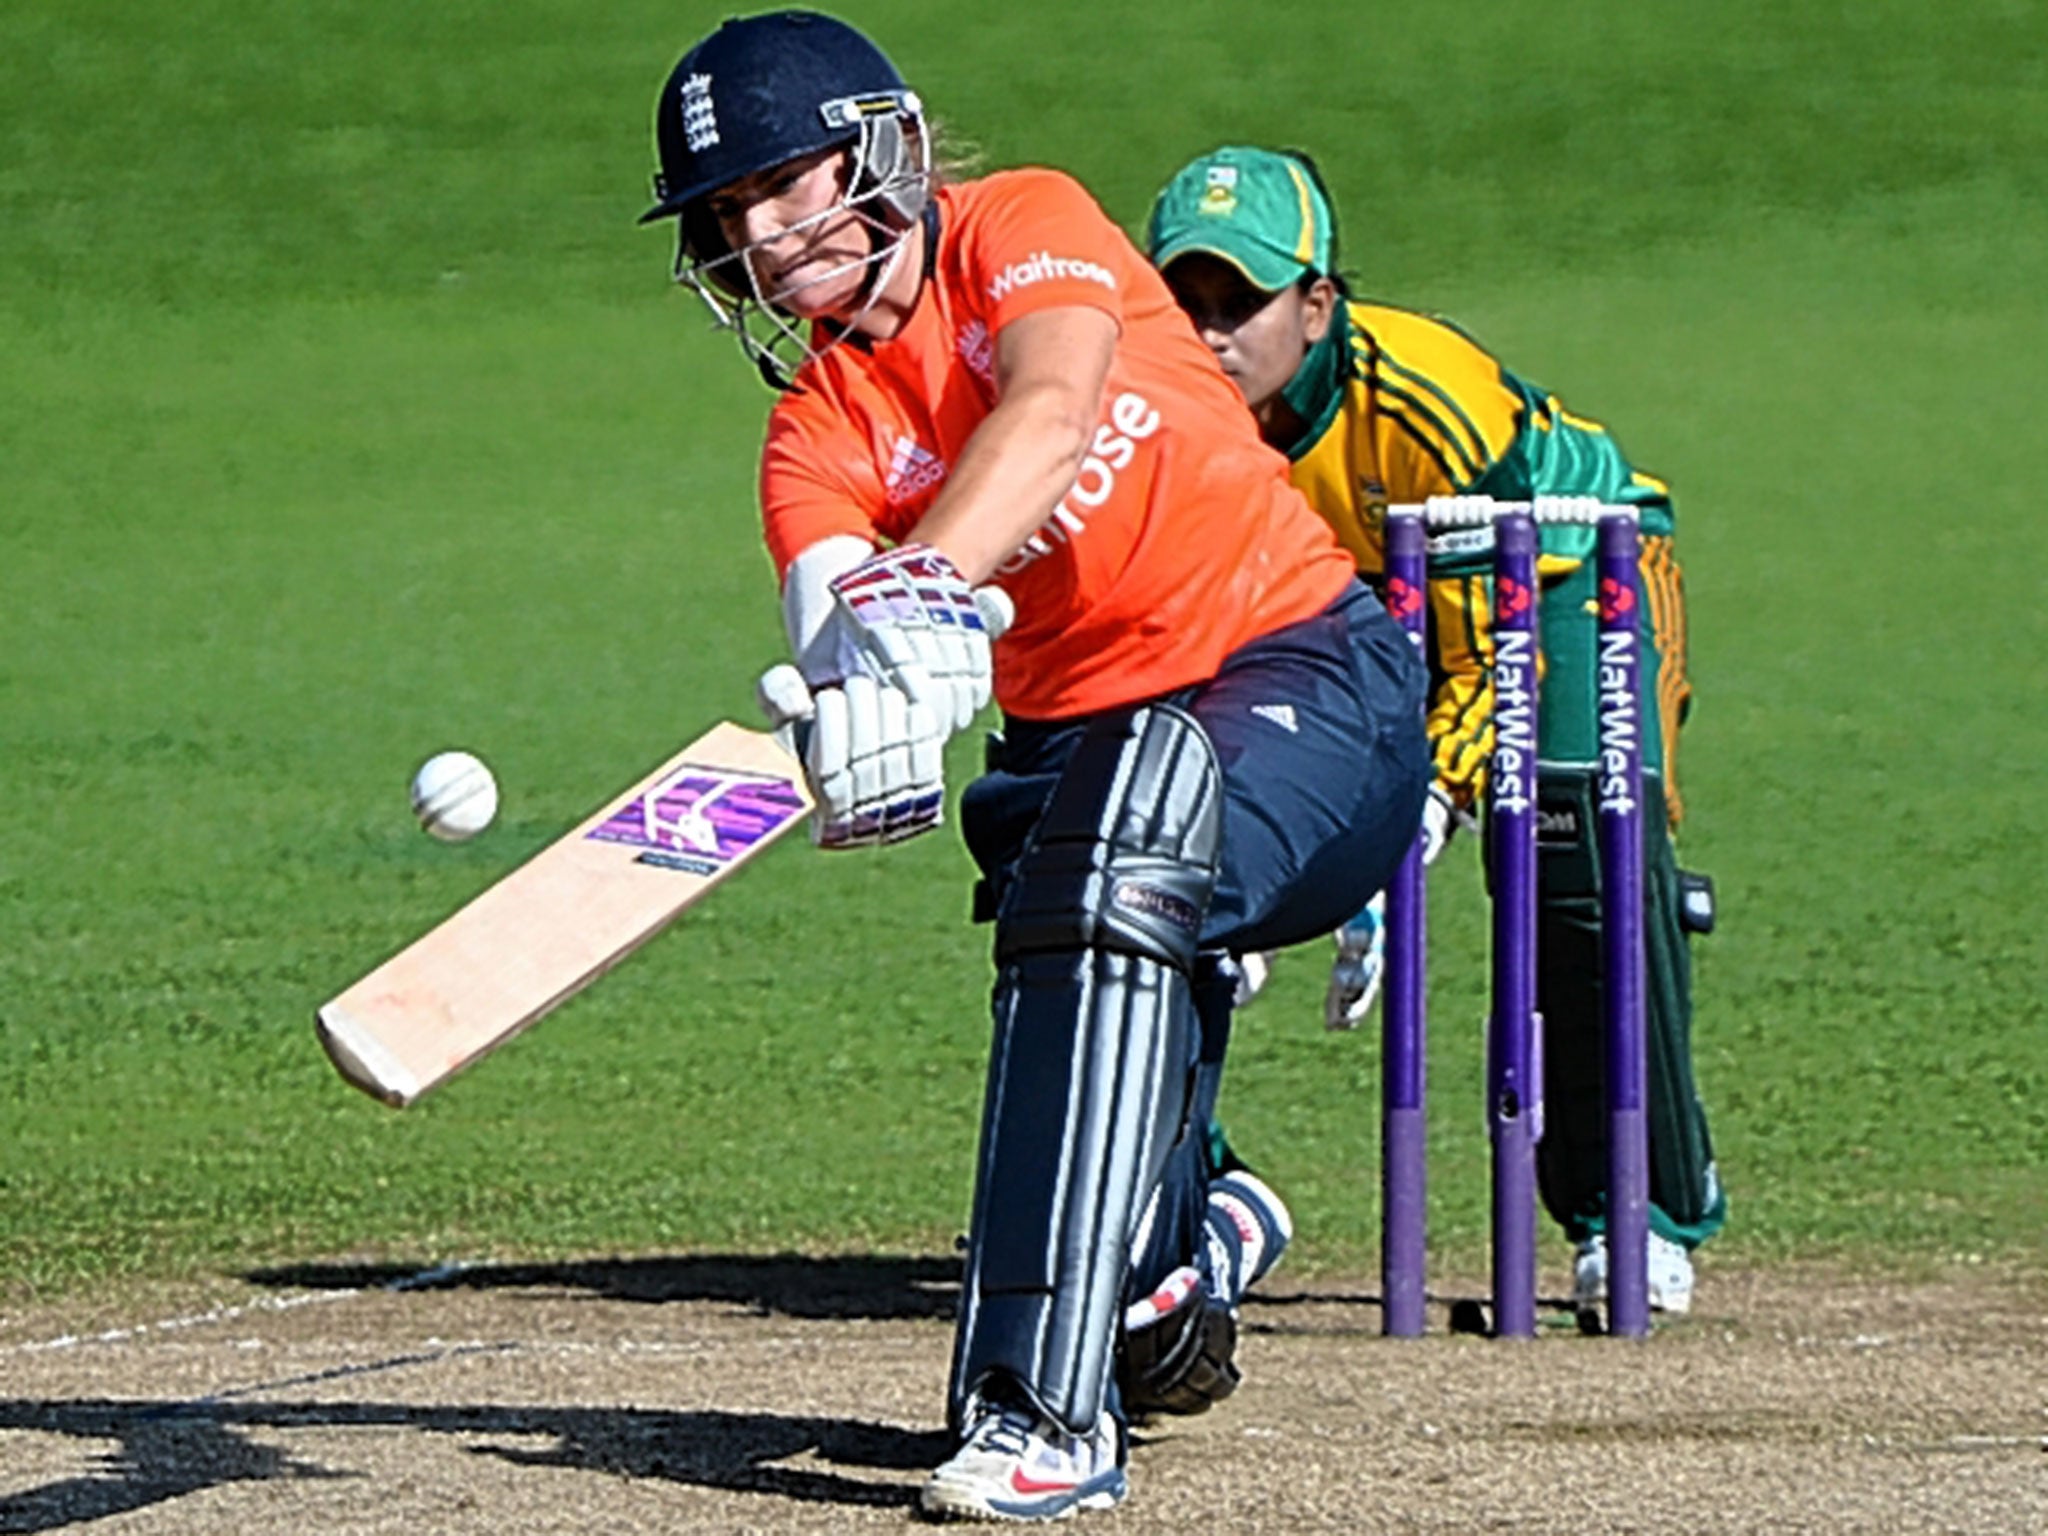 Lauren Winfield on her way to a decisive 74 for England at Edgbaston on Sunday